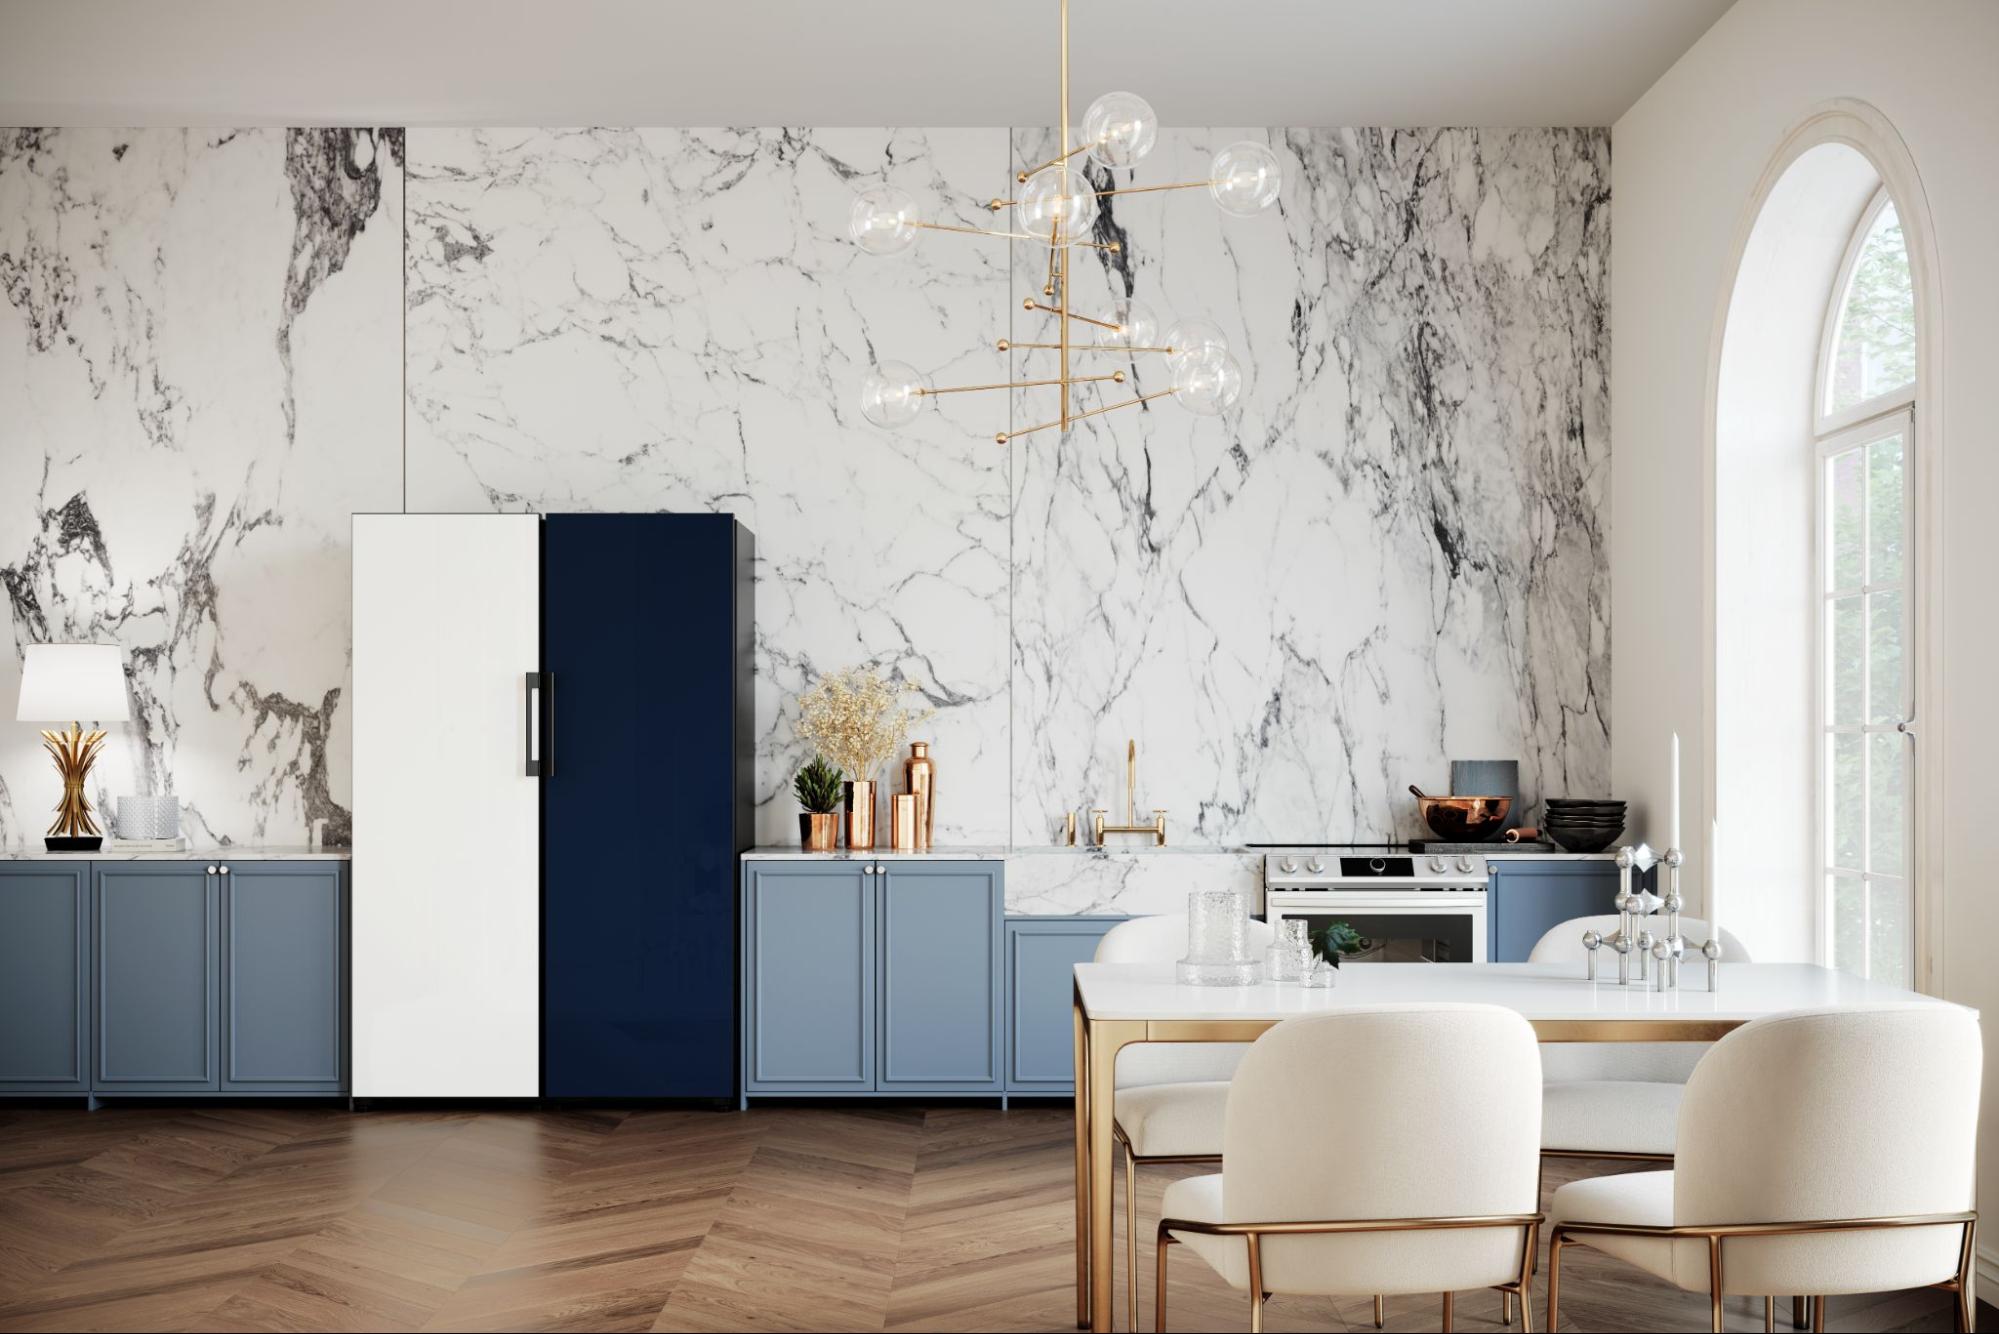 Samsung Philippines launches Bespoke Refrigerator: A unique way to personalize your kitchen space